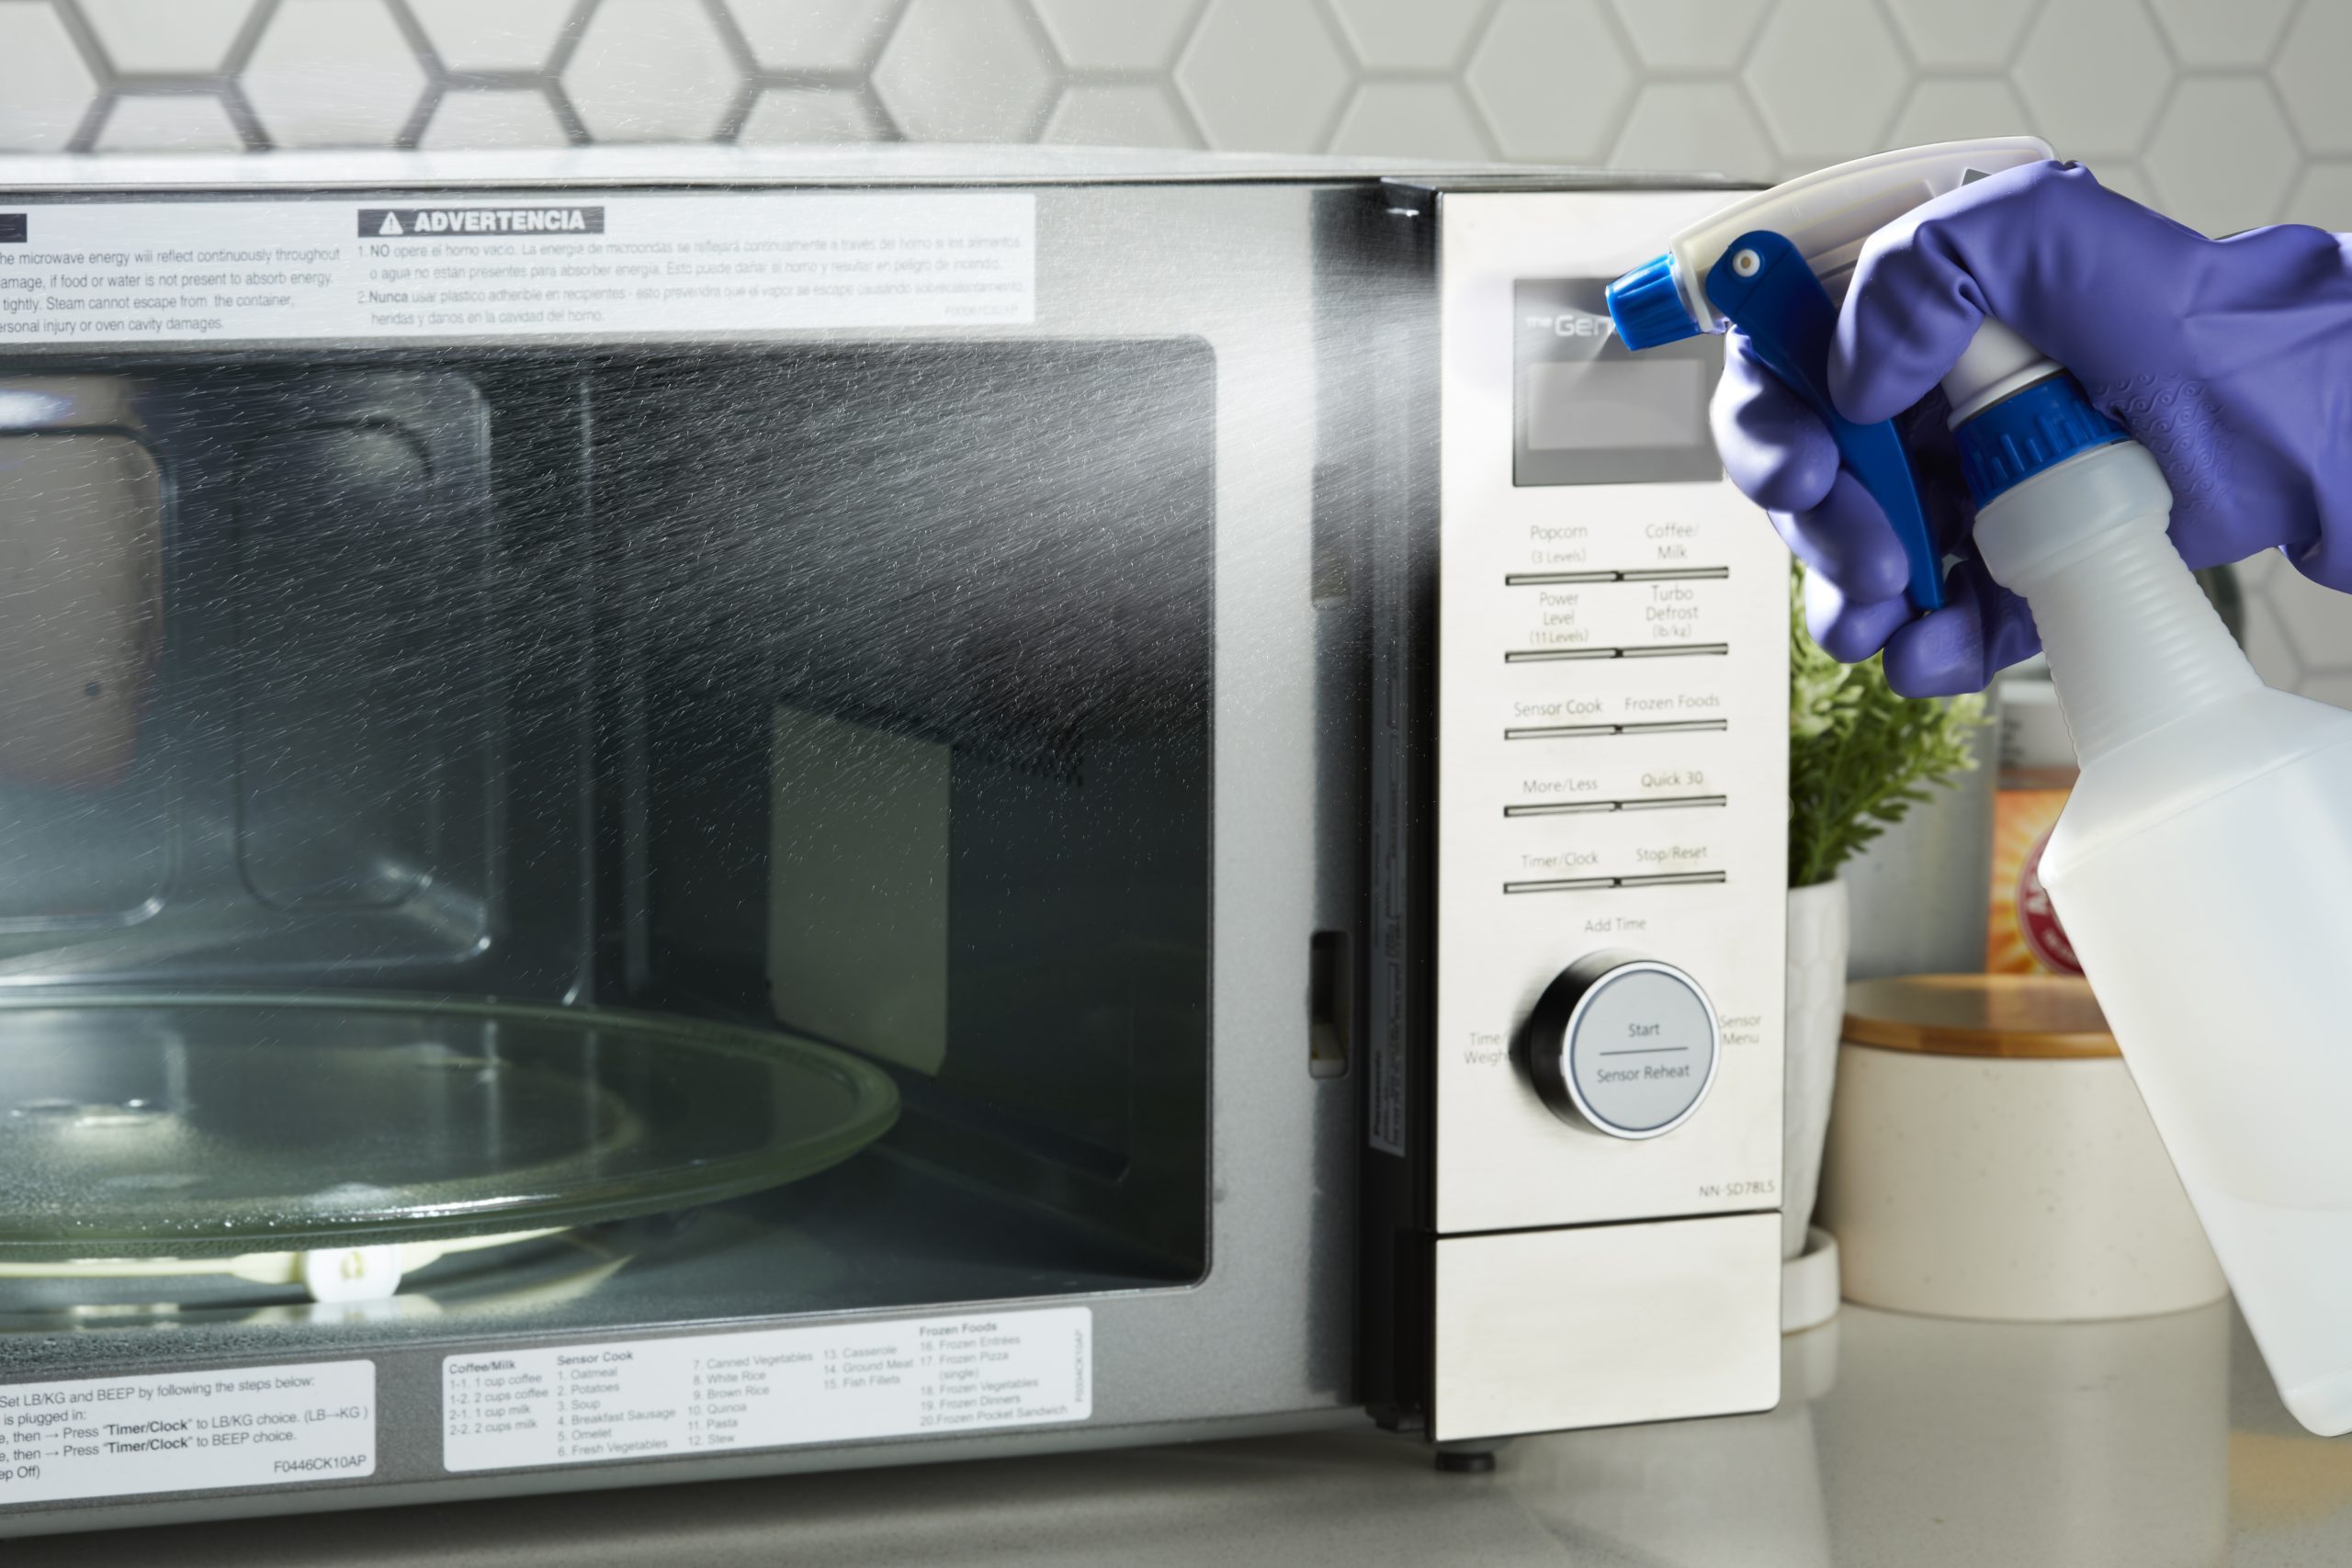 How to Clean a Microwave (Tested & Approved)